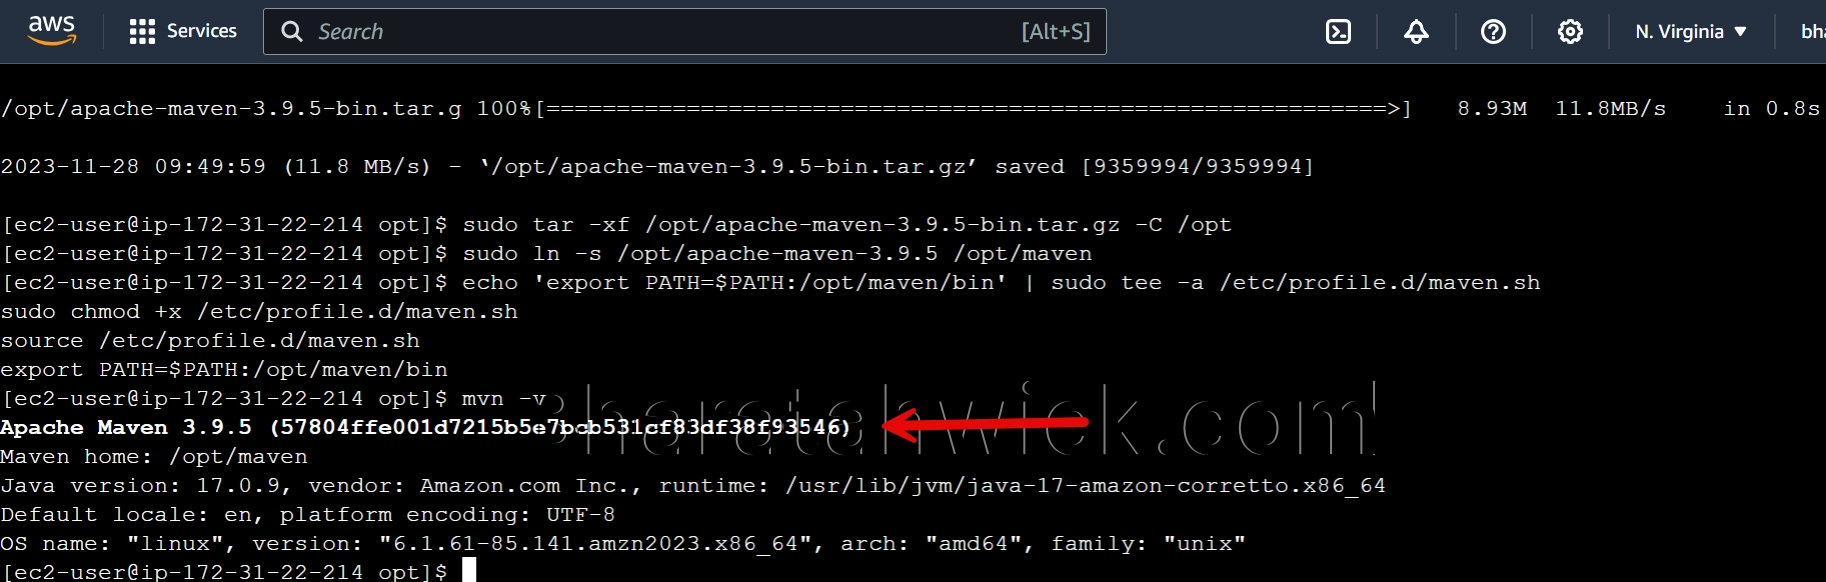 How to Install Apache Maven on AWS Linux